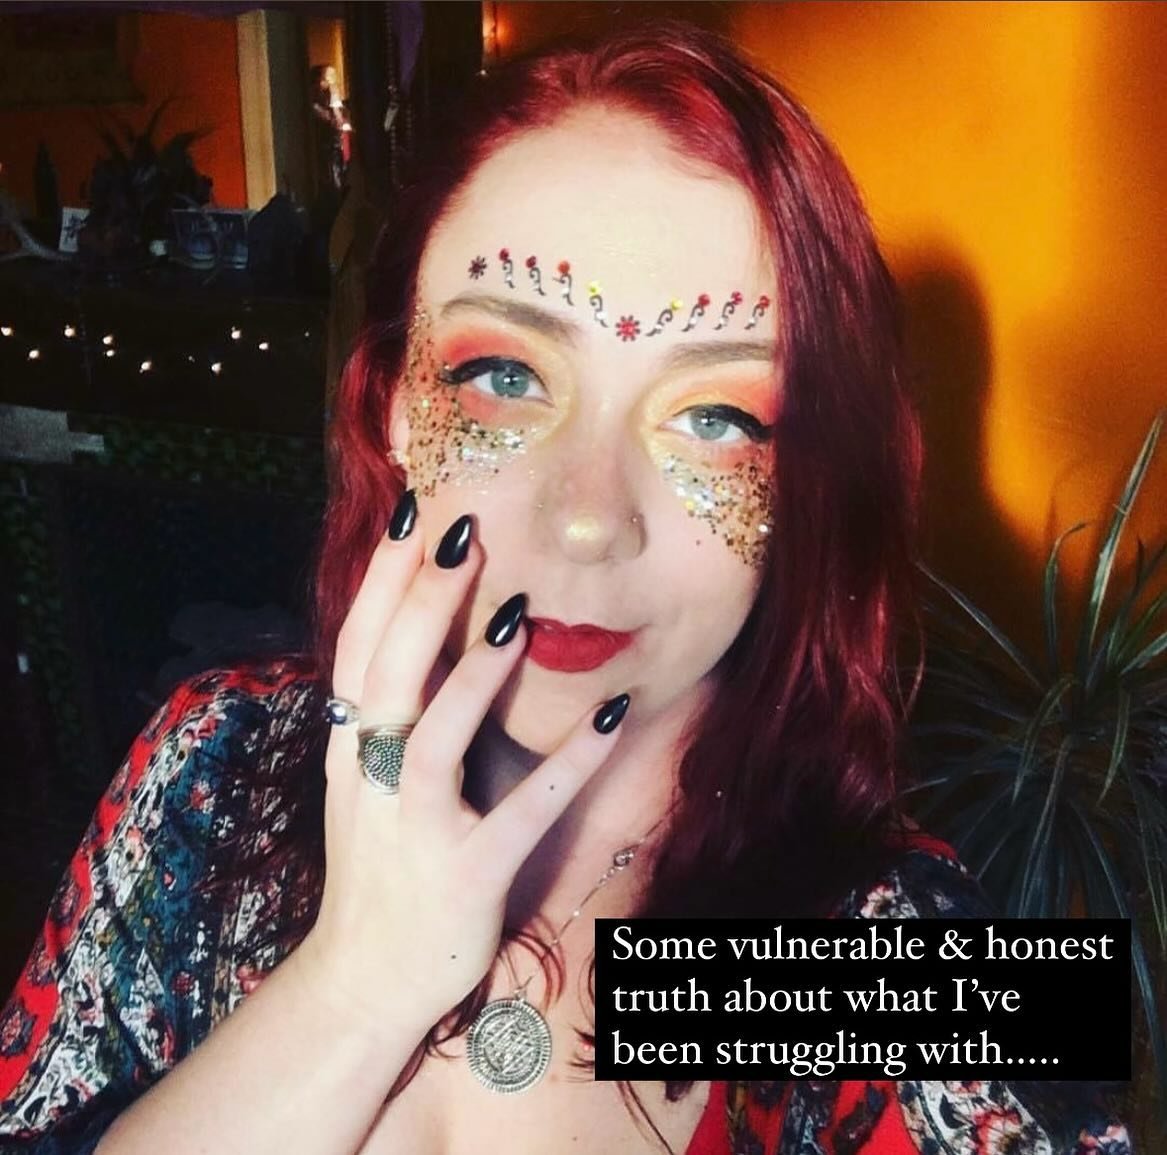 Vulnerable and honest share inspired by @empowertraining_ (thank you). This was incredibly cathartic. 

I have more of these truths to share and I will. It&rsquo;s important to remember that our internal struggles are not often portrayed on social me